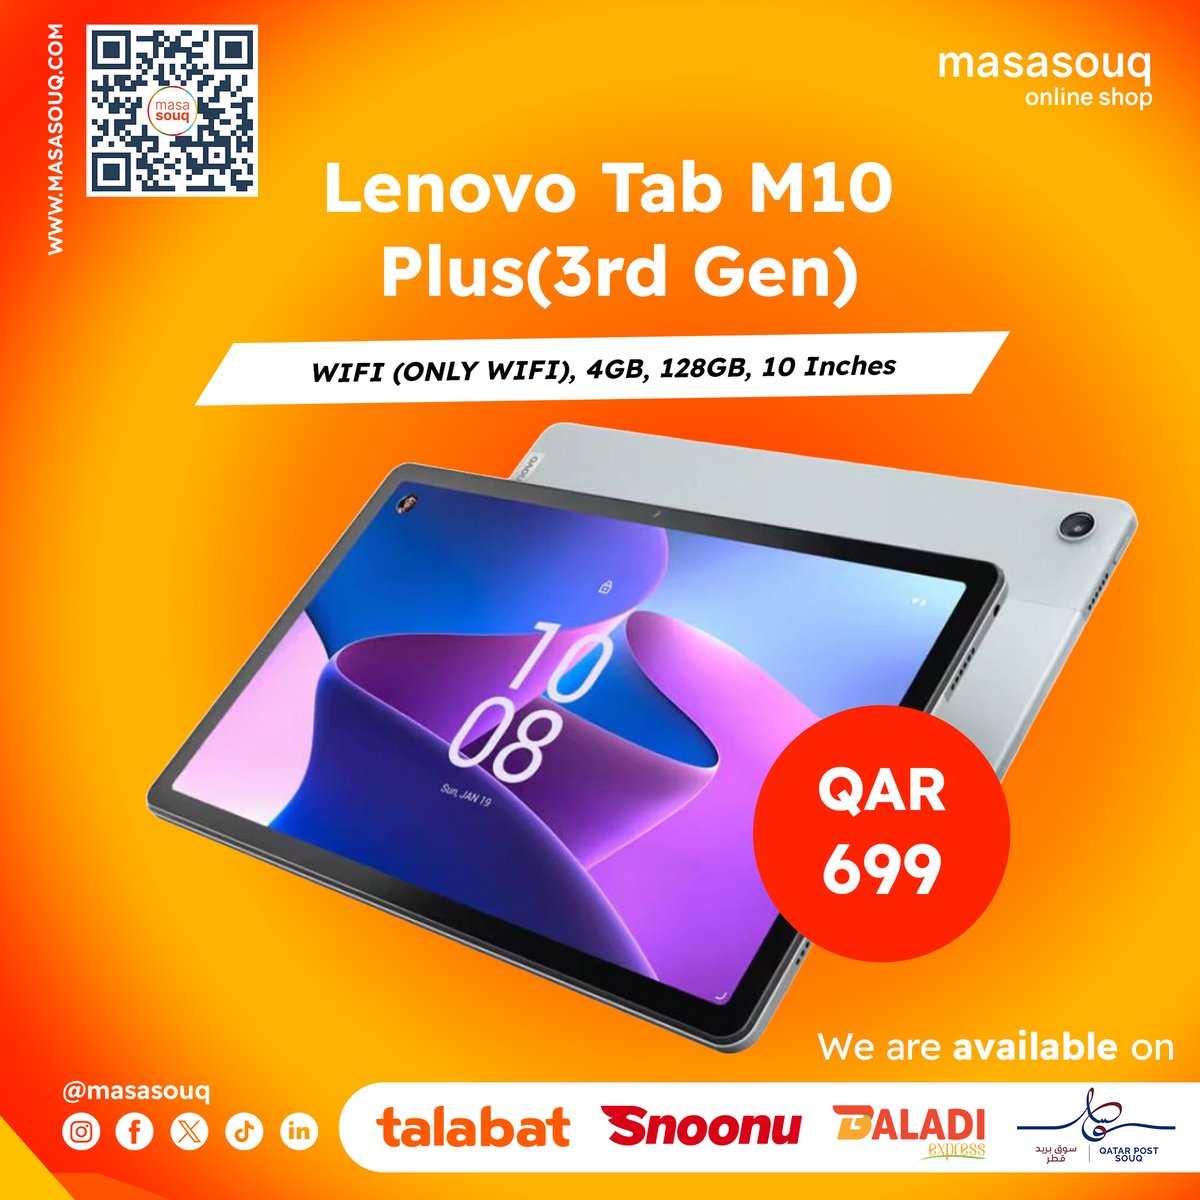 Upgrade your on-the-go experience! The Lenovo Tab M10 Plus boasts a sleek design, powerful processor, and immersive display.  Yours for QAR699! #Lenovo #tablet #entertainment #productivity #Masasouq 🤩

Order link: masasouq.com/lenovo-tab-m10…